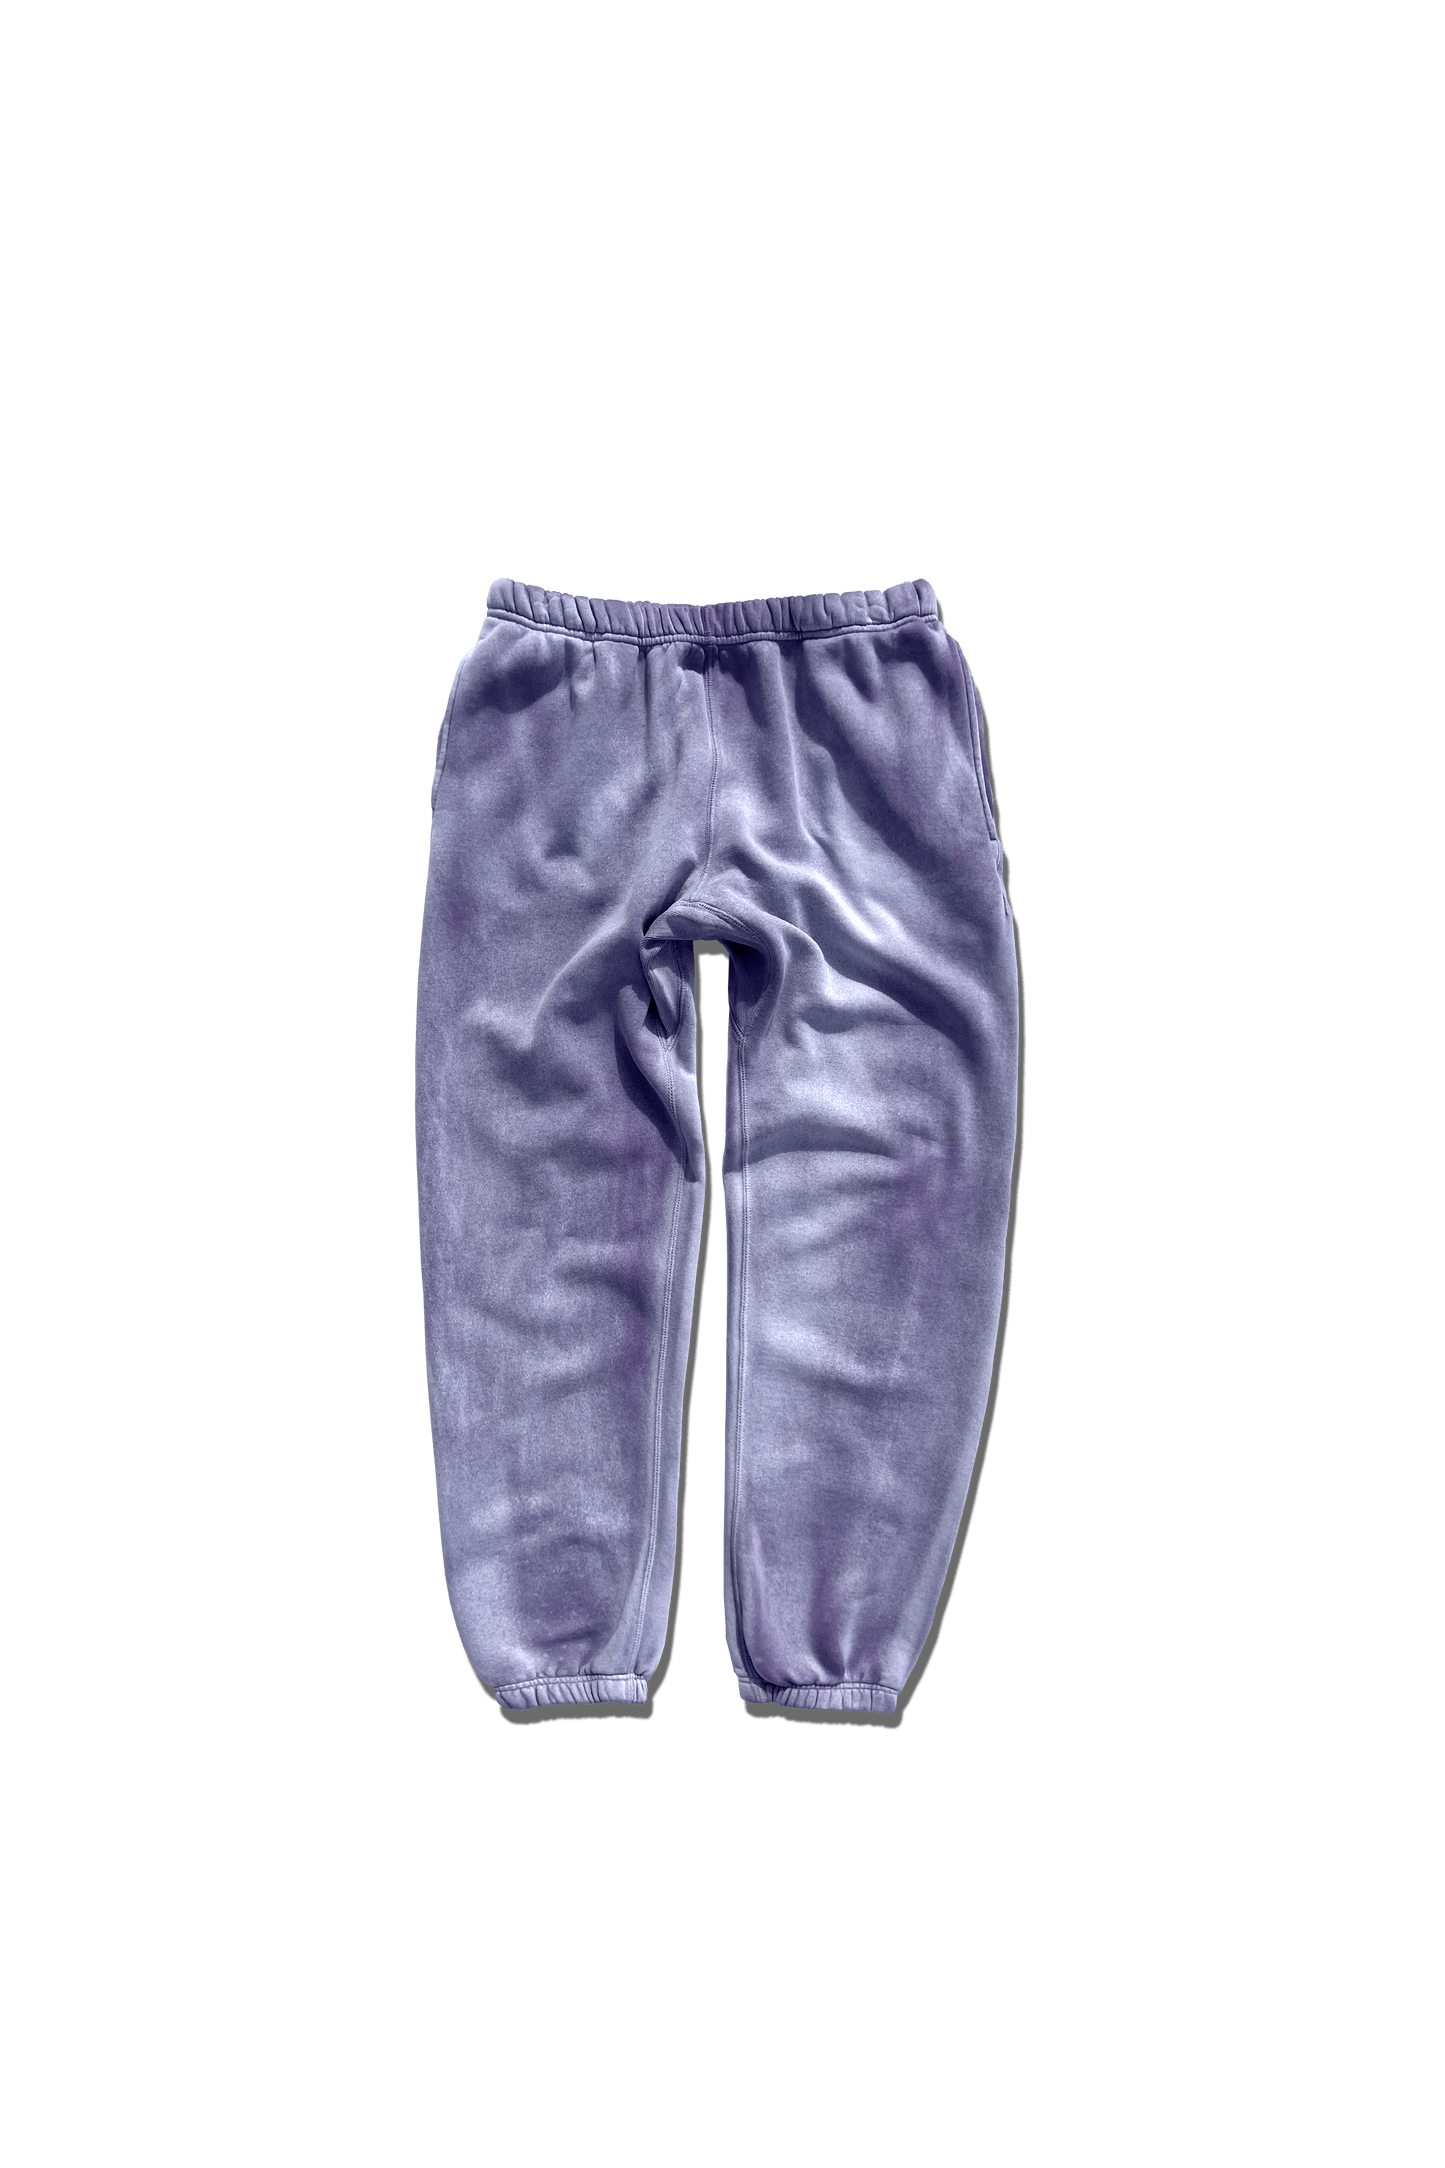 Exclusive Varsity Sweatpants - Sheen Frosted Grape